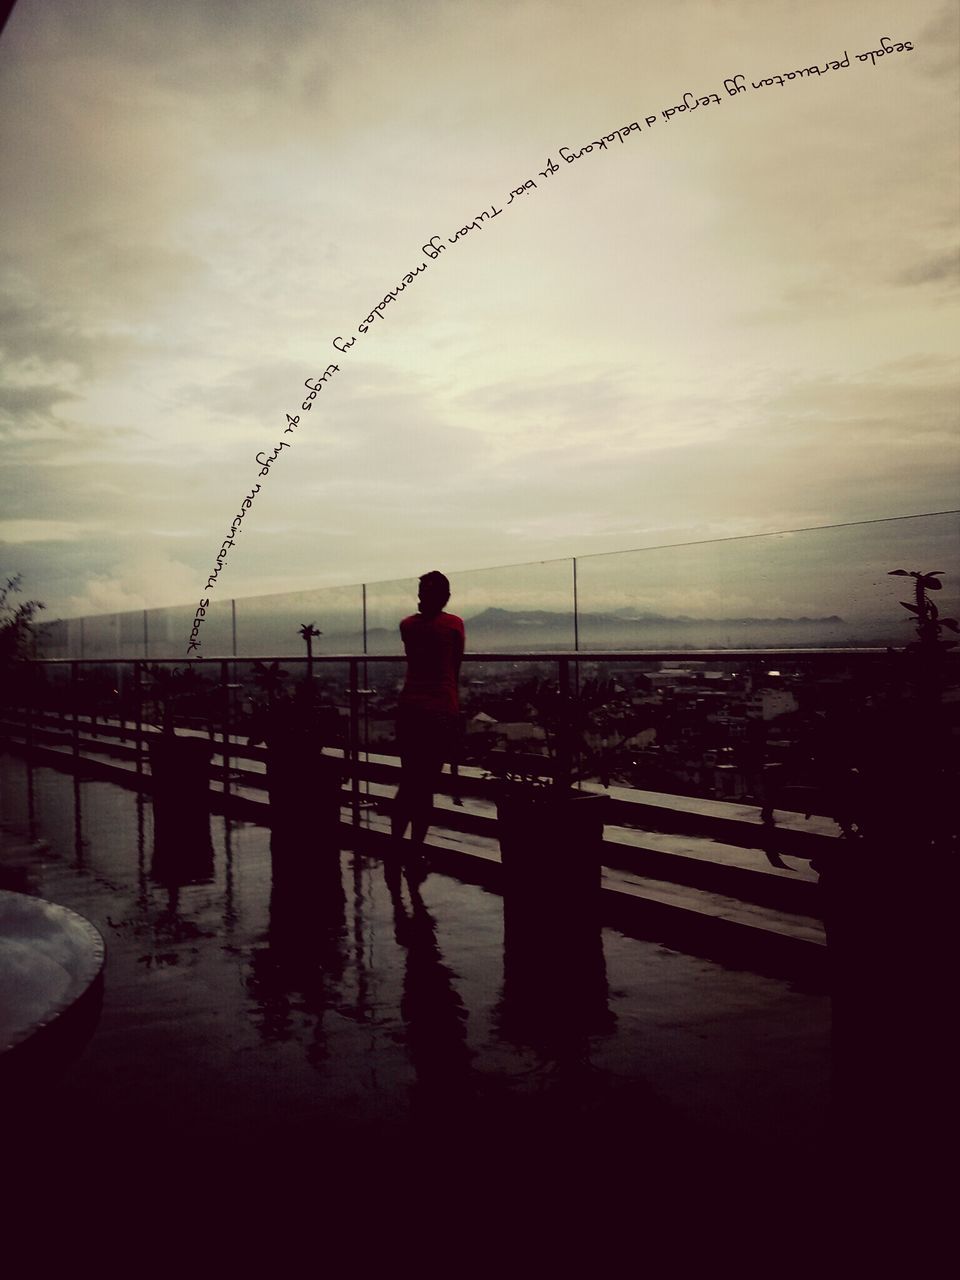 water, silhouette, sky, lifestyles, full length, men, leisure activity, rear view, sunset, cloud - sky, standing, railing, sea, reflection, person, pier, cloud